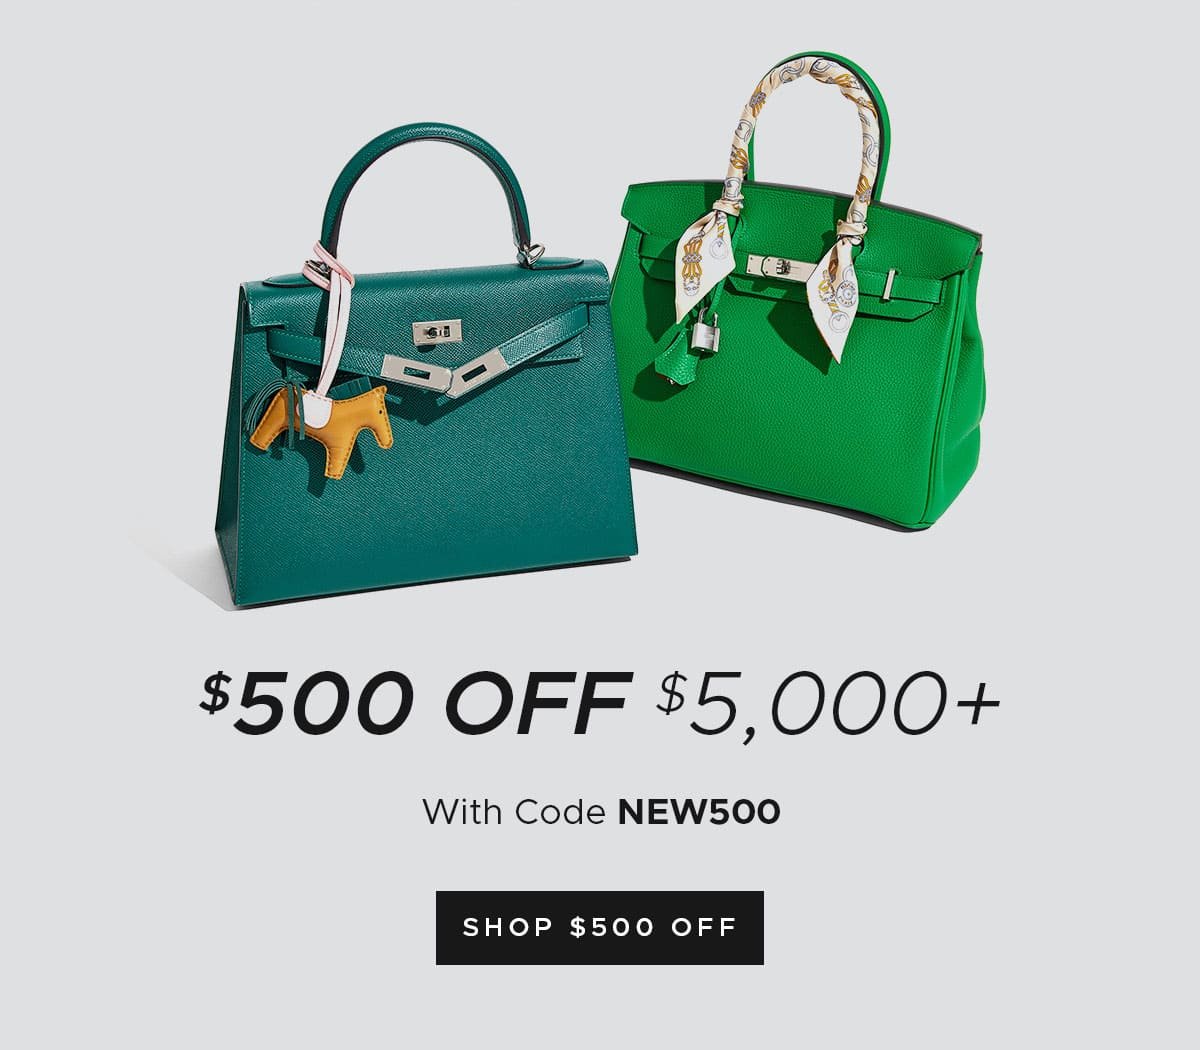 \\$300 Off \\$3,000+ With Code NEW300